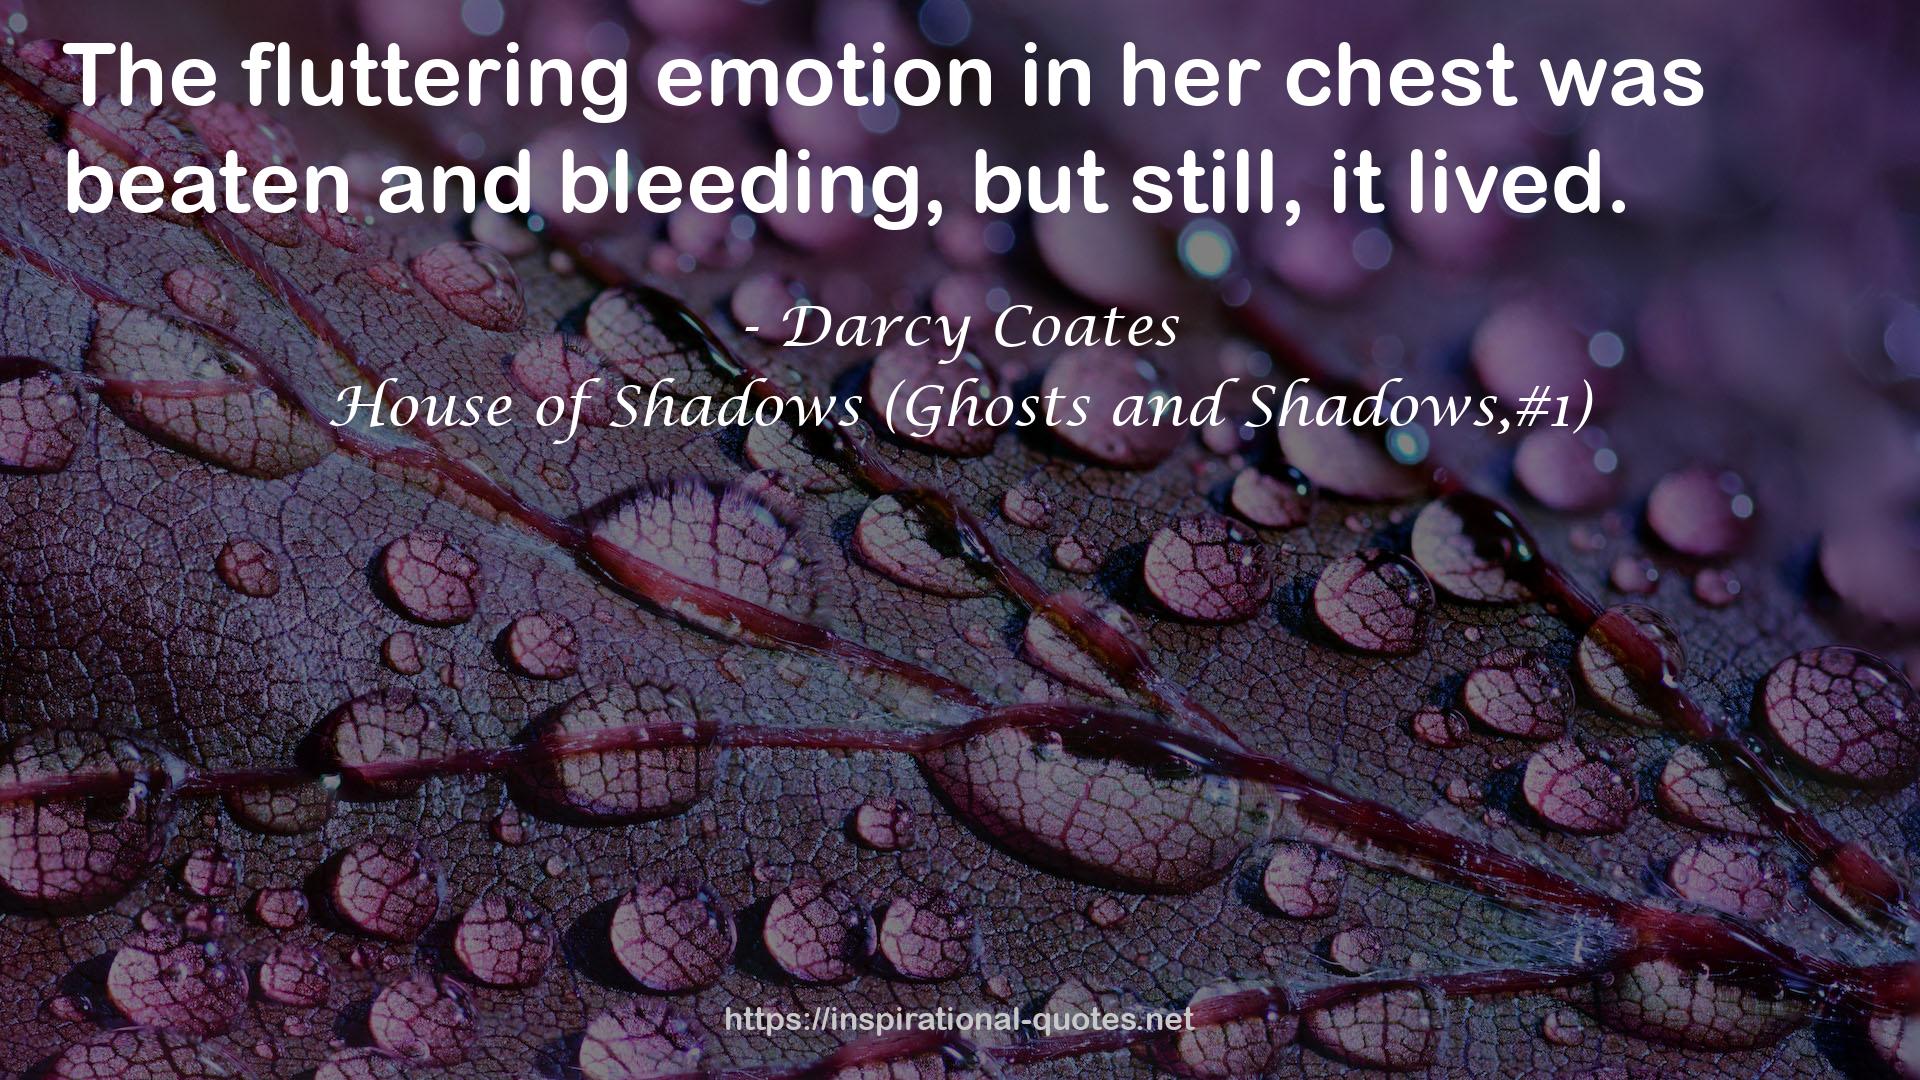 House of Shadows (Ghosts and Shadows,#1) QUOTES